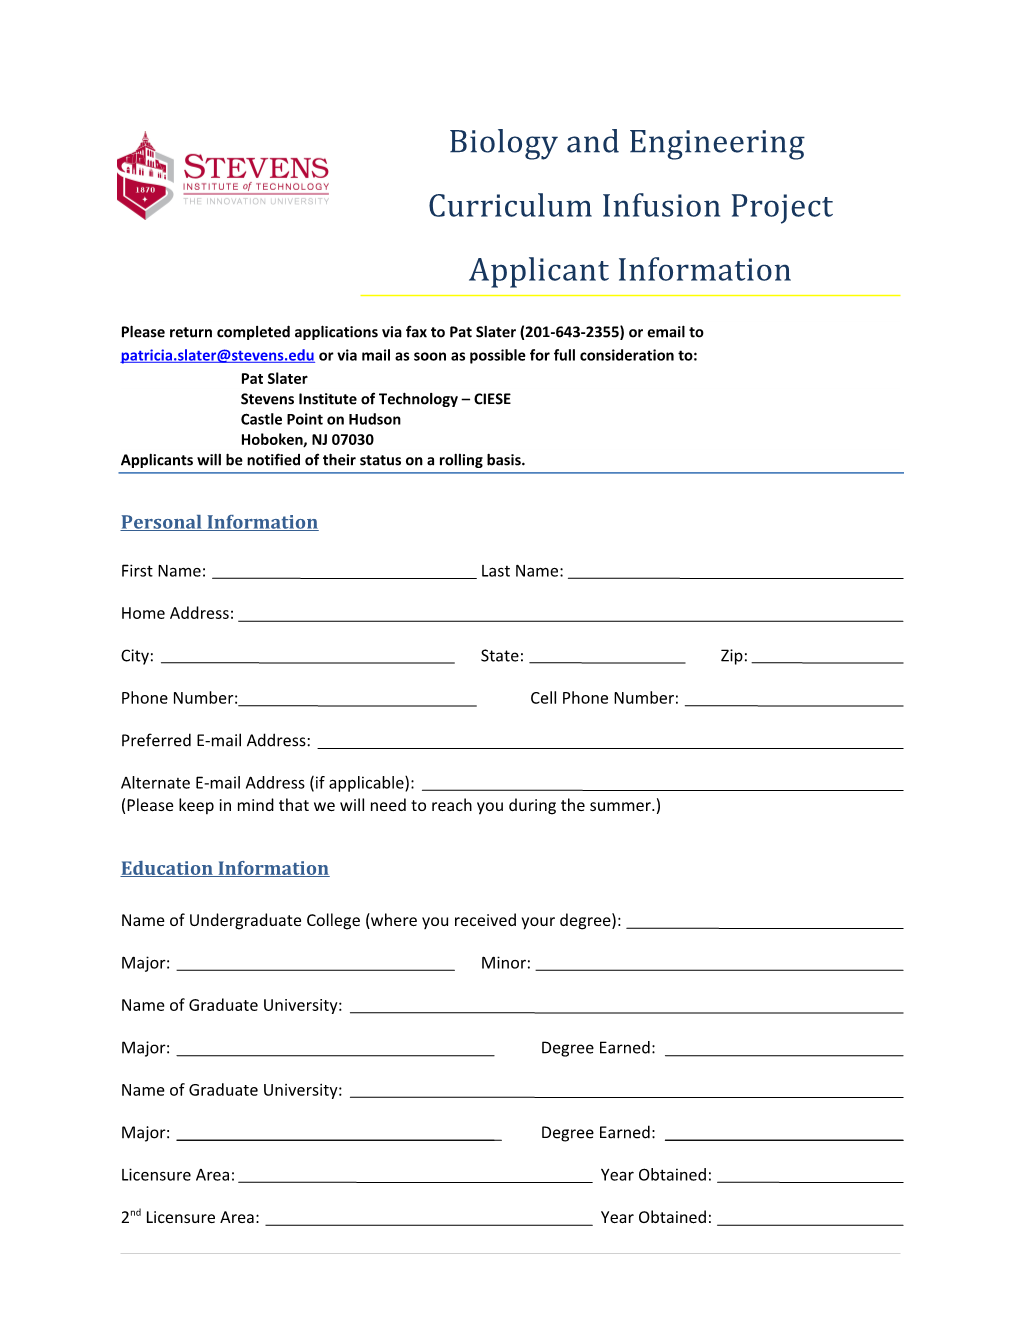 Physics and Engineering Curriculum Infusion Applicant Information